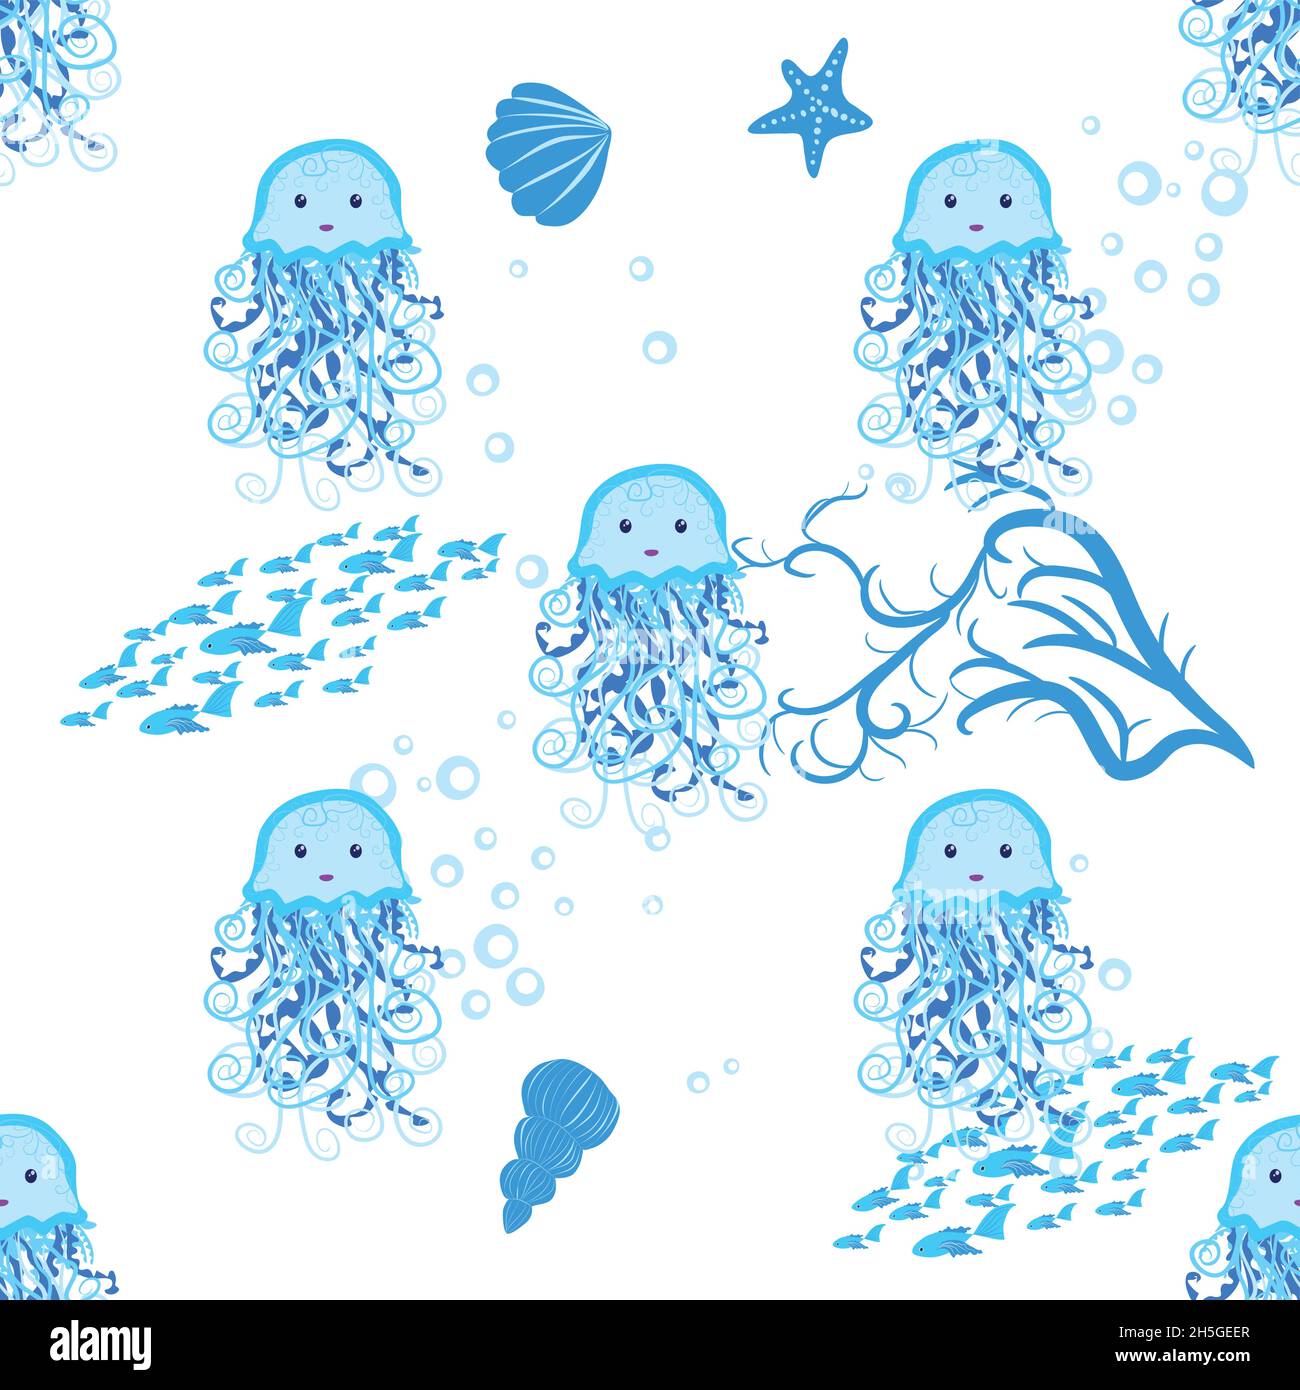 Jellyfish, fish, animals bright seamless patterns. Sea travel, snorkeling with animals, tropical fish Stock Vector